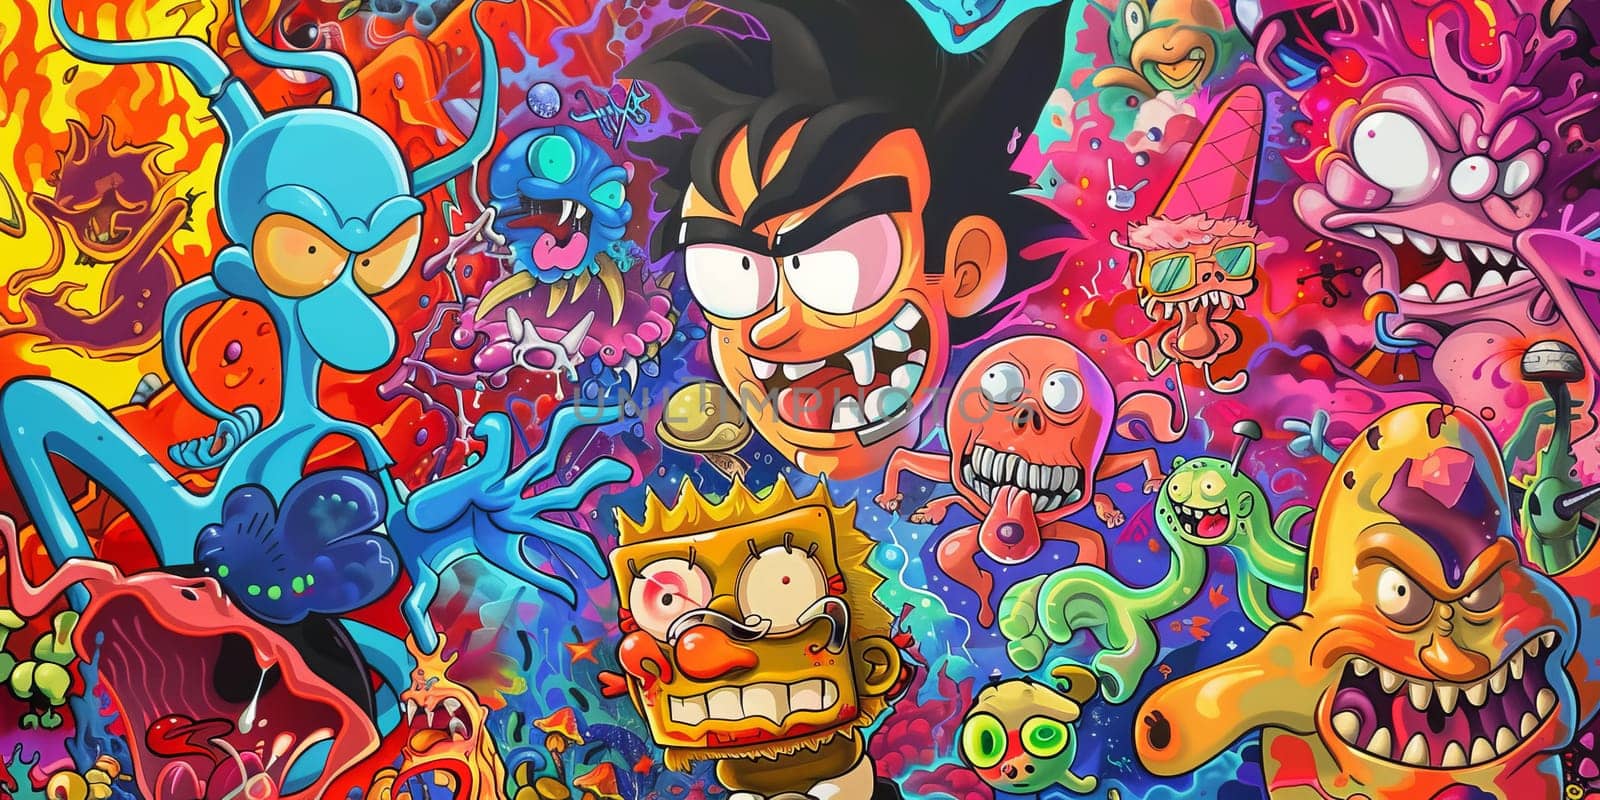 Colorful scene of monsters as a background or texture